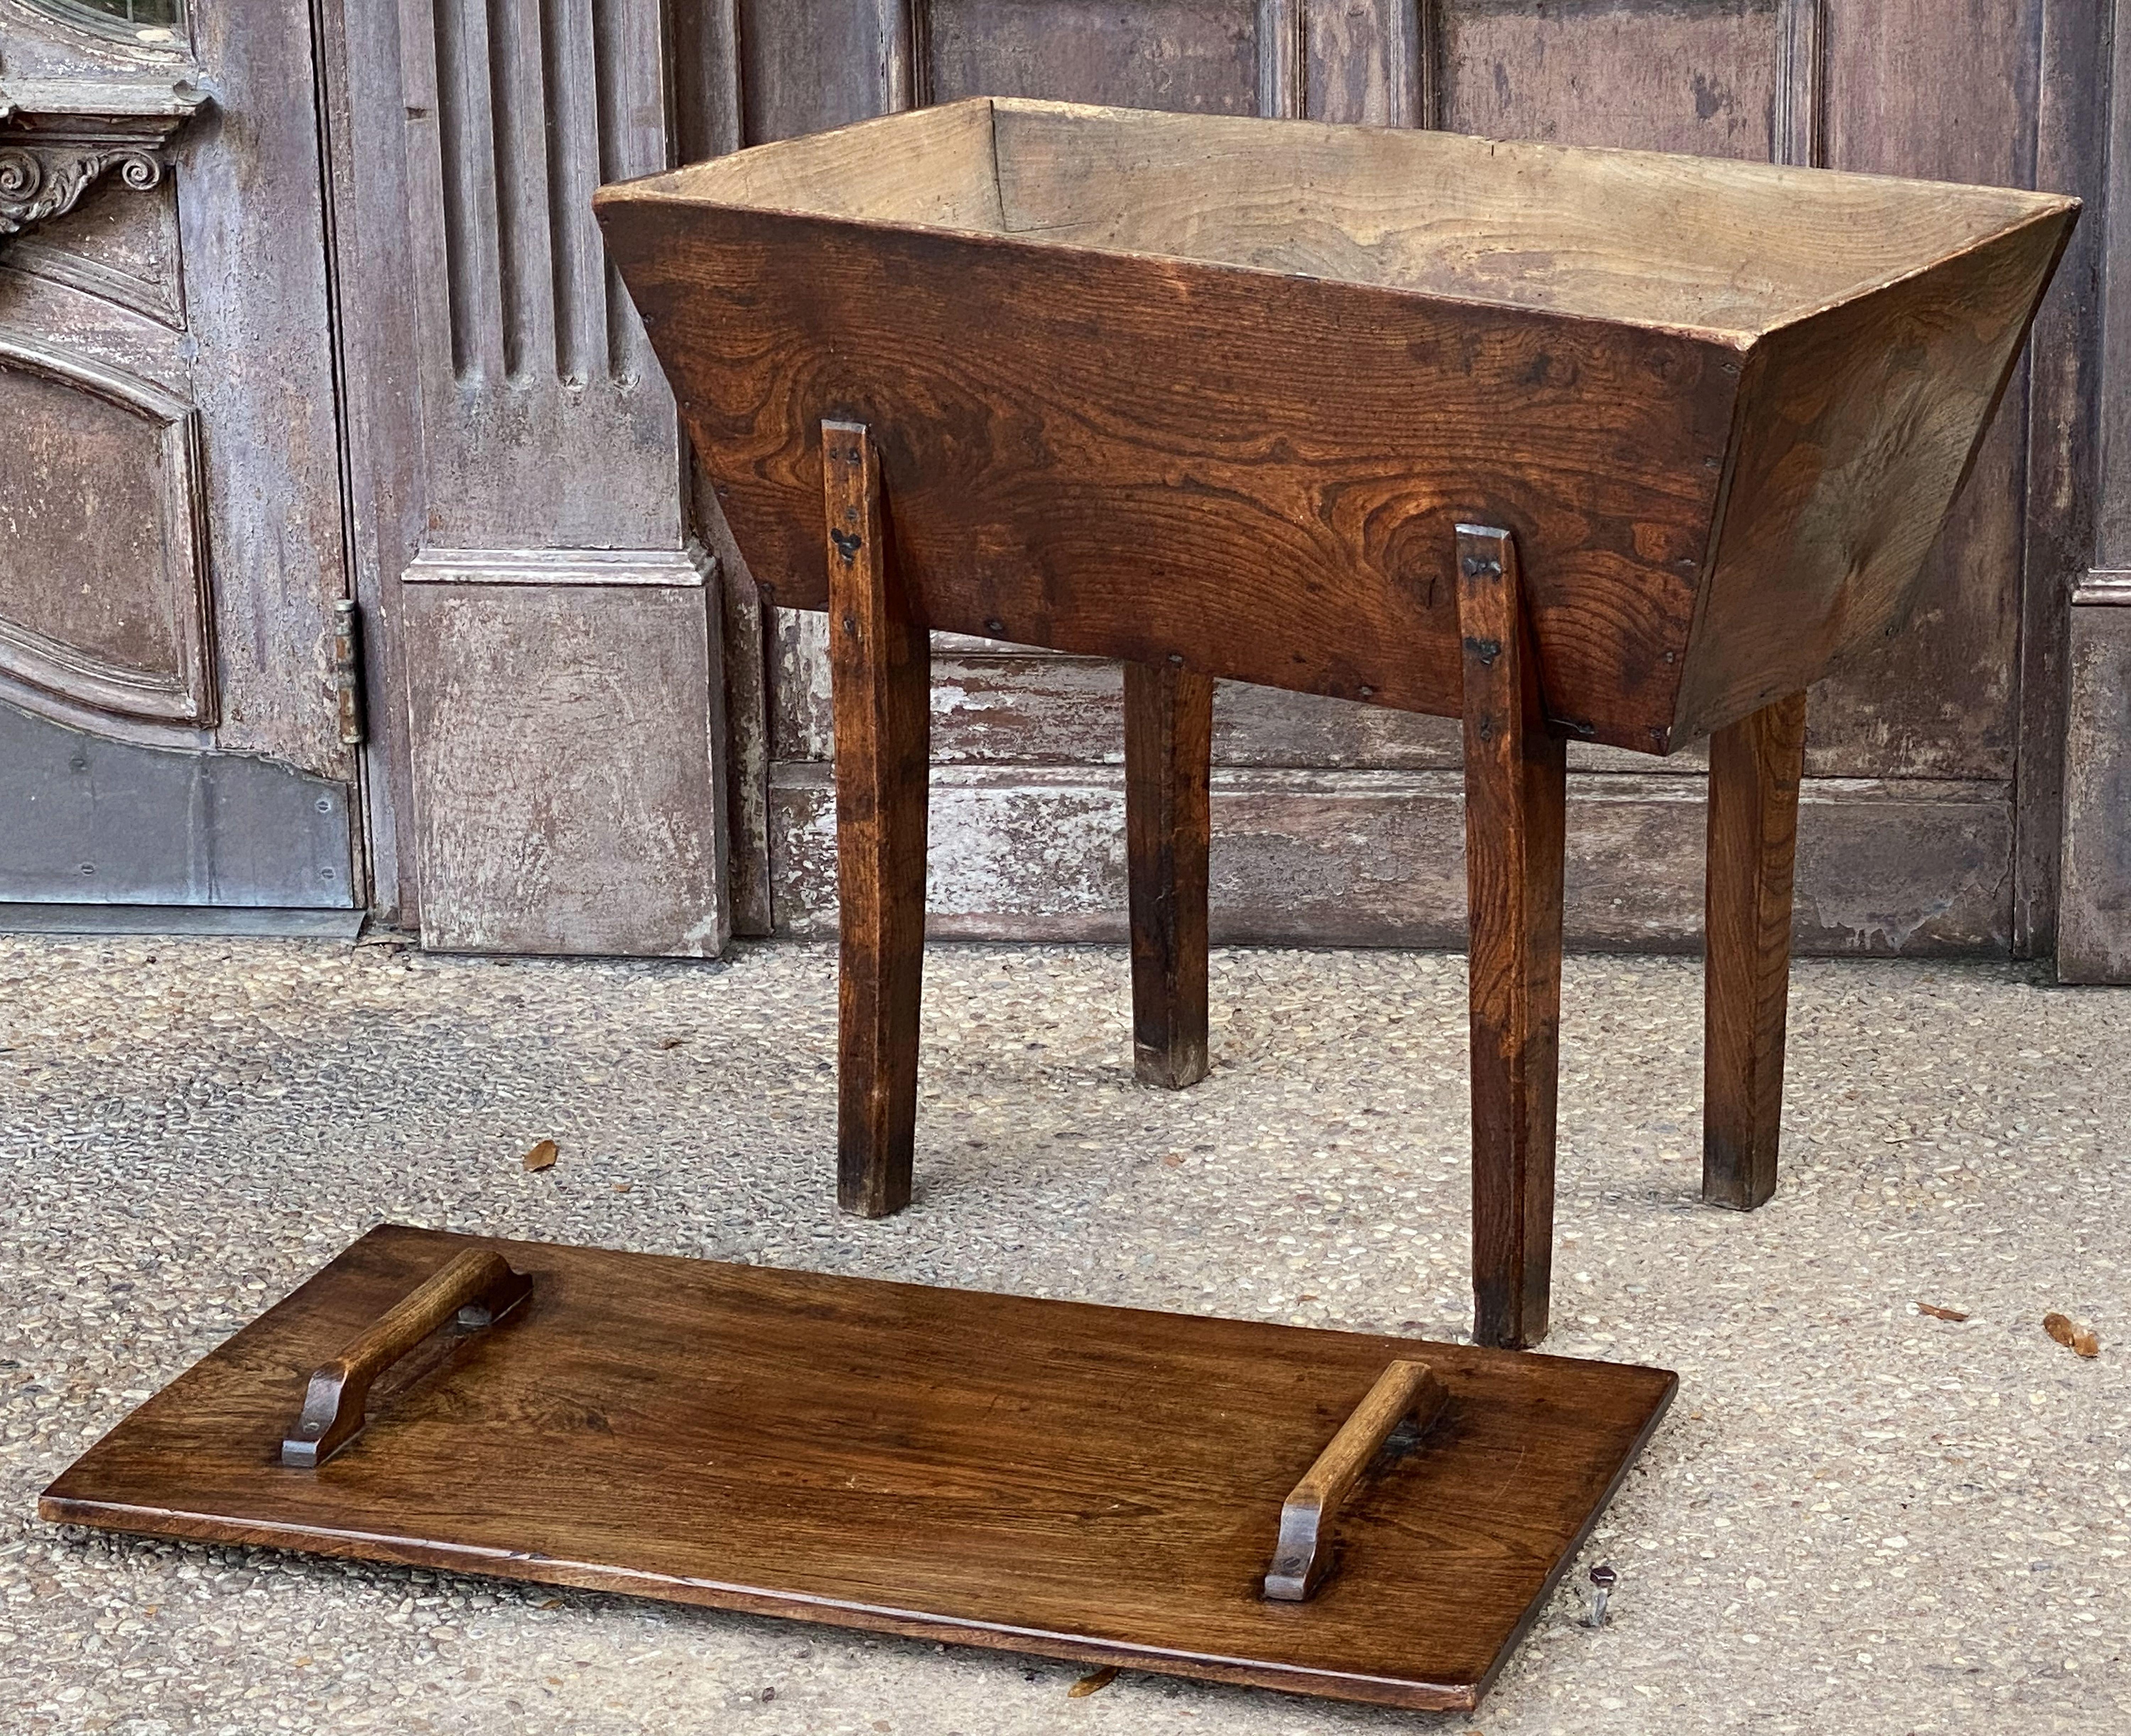 A fine French dough bin or proving chest of elm from a 19th century boulangerie or bakery, with a handsome patina, removable rectangular lid with handles, over a rustic base, resting on four tapering legs.

The interior of the bin was where flour